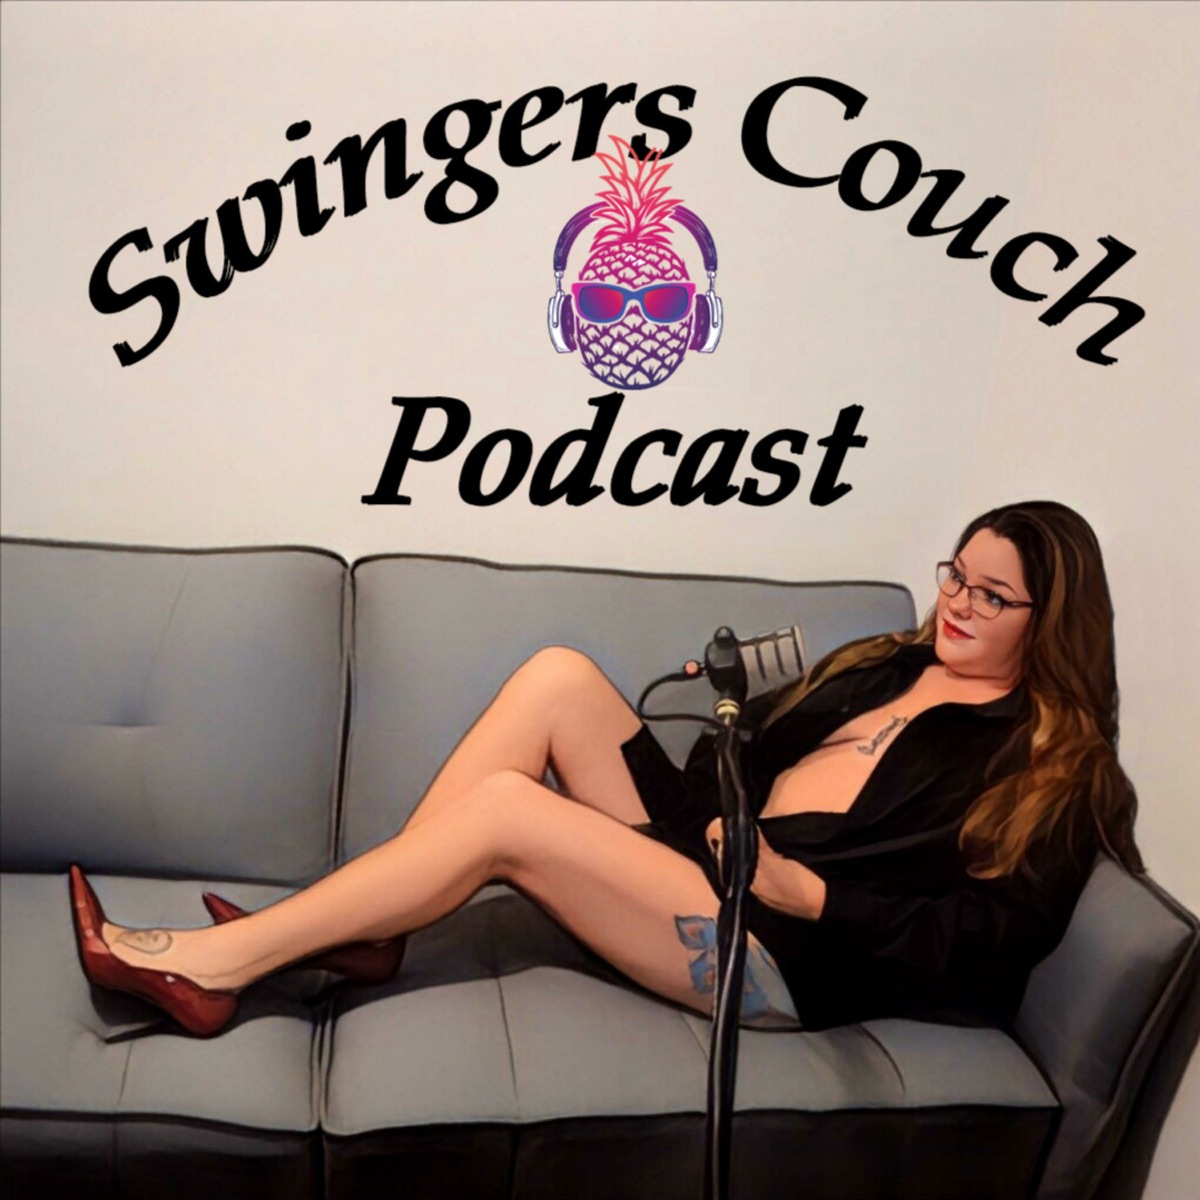 swingers couch podcast – Podcast picture